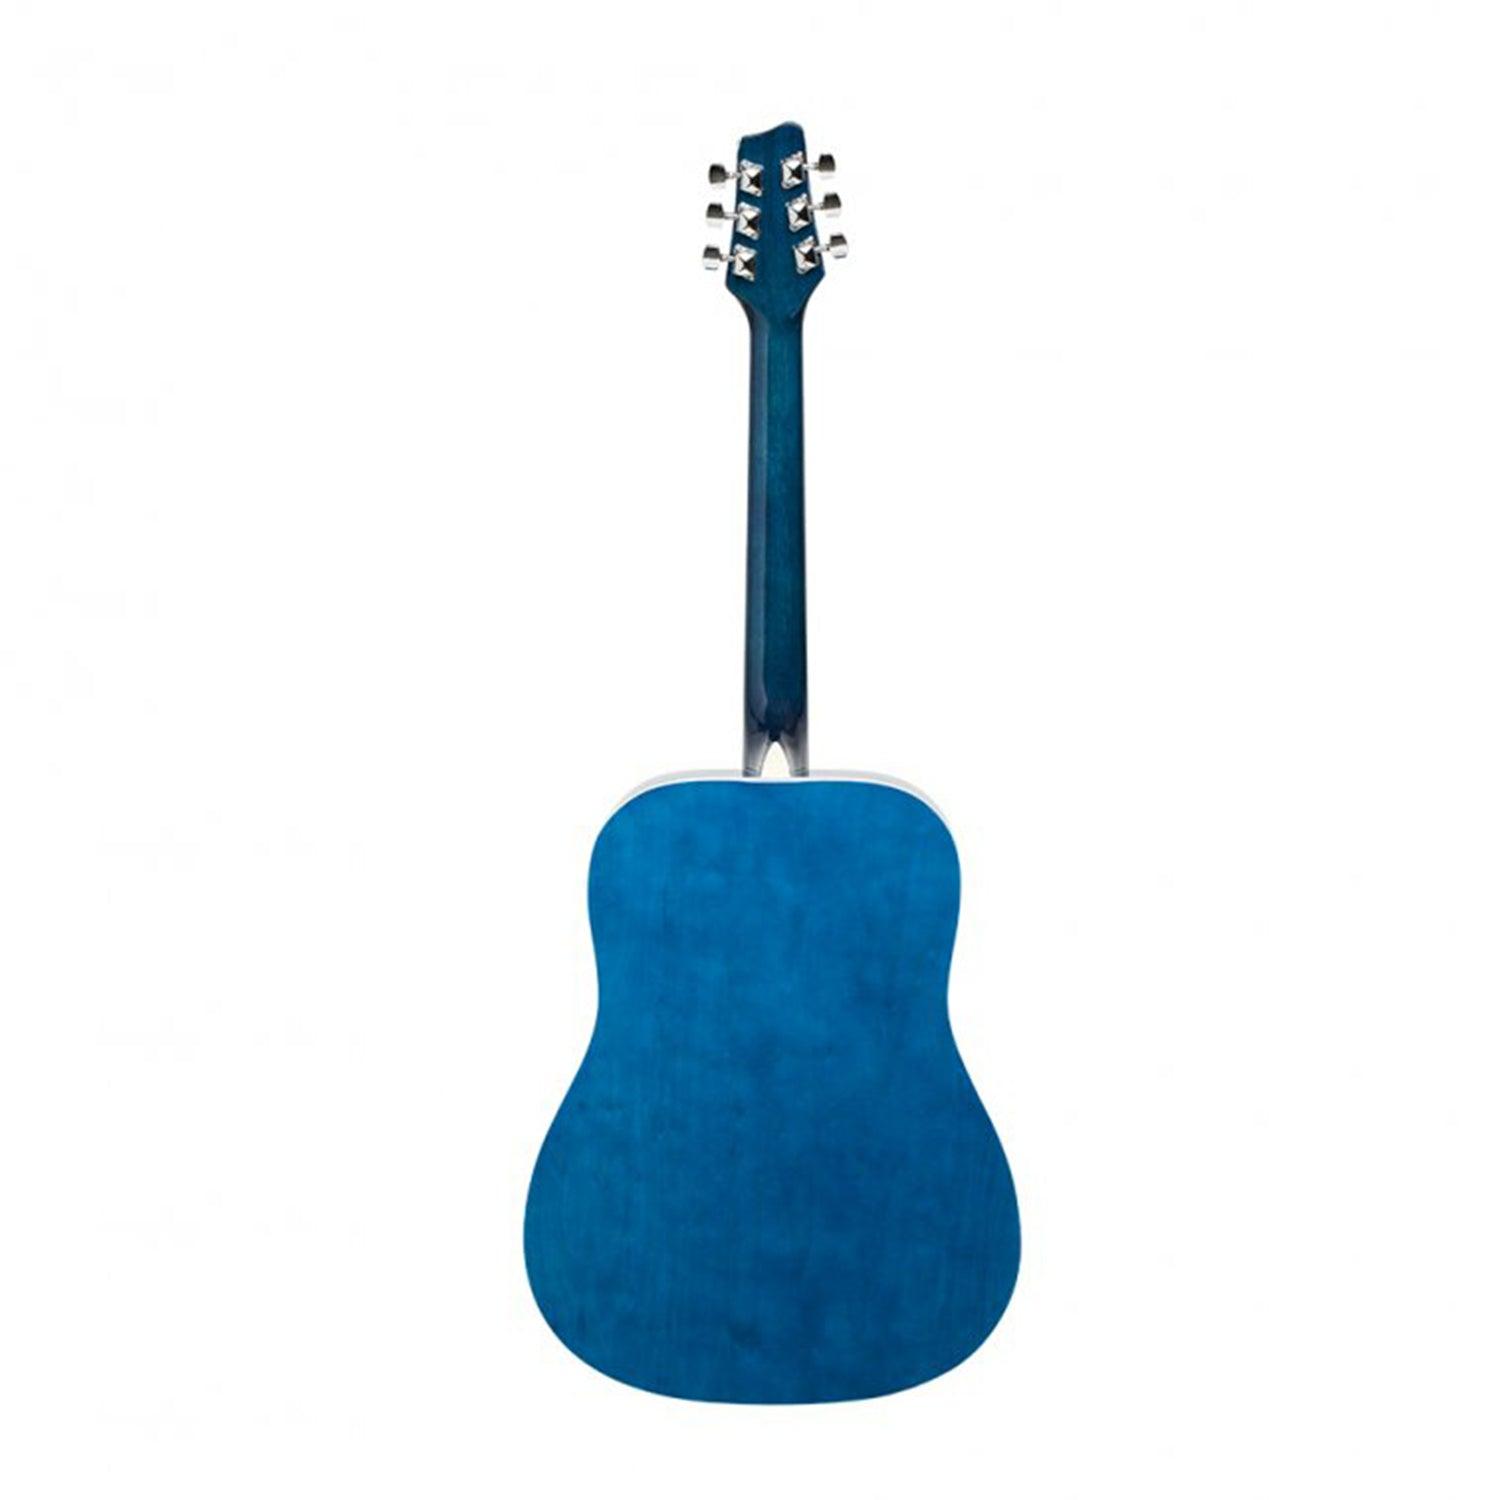 Stagg SA20D BLUE Blue Dreadnought Acoustic Guitar with Basswood Top - DY Pro Audio